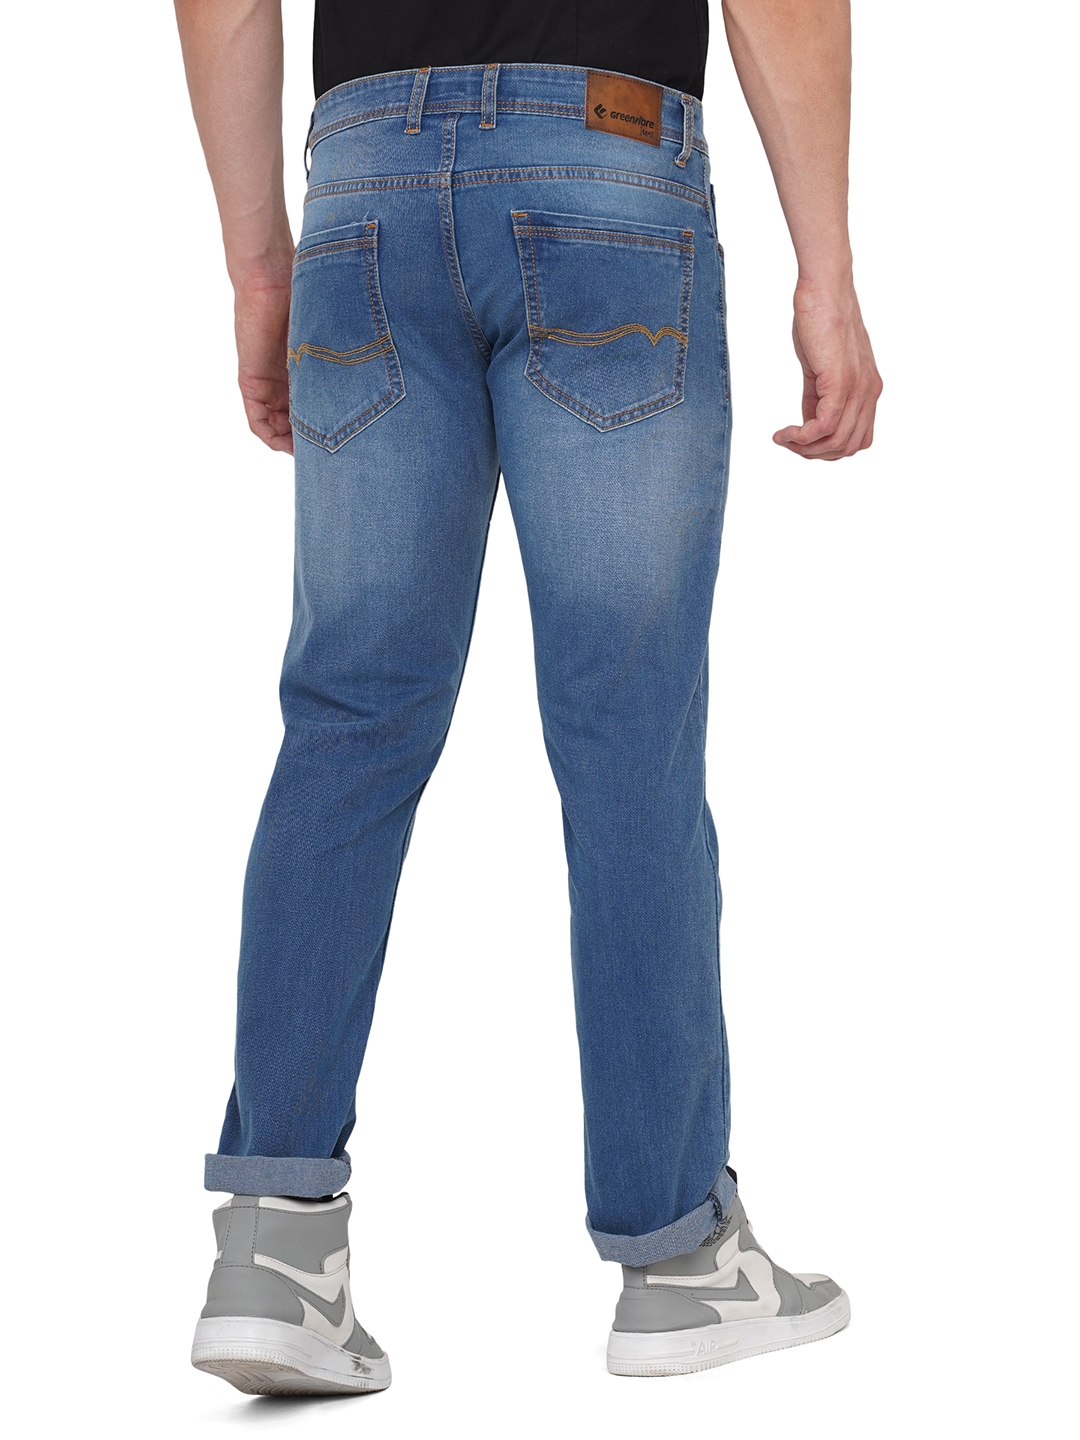 Greenfibre | River Blue Washed Straight Fit Jeans | Greenfibre 2